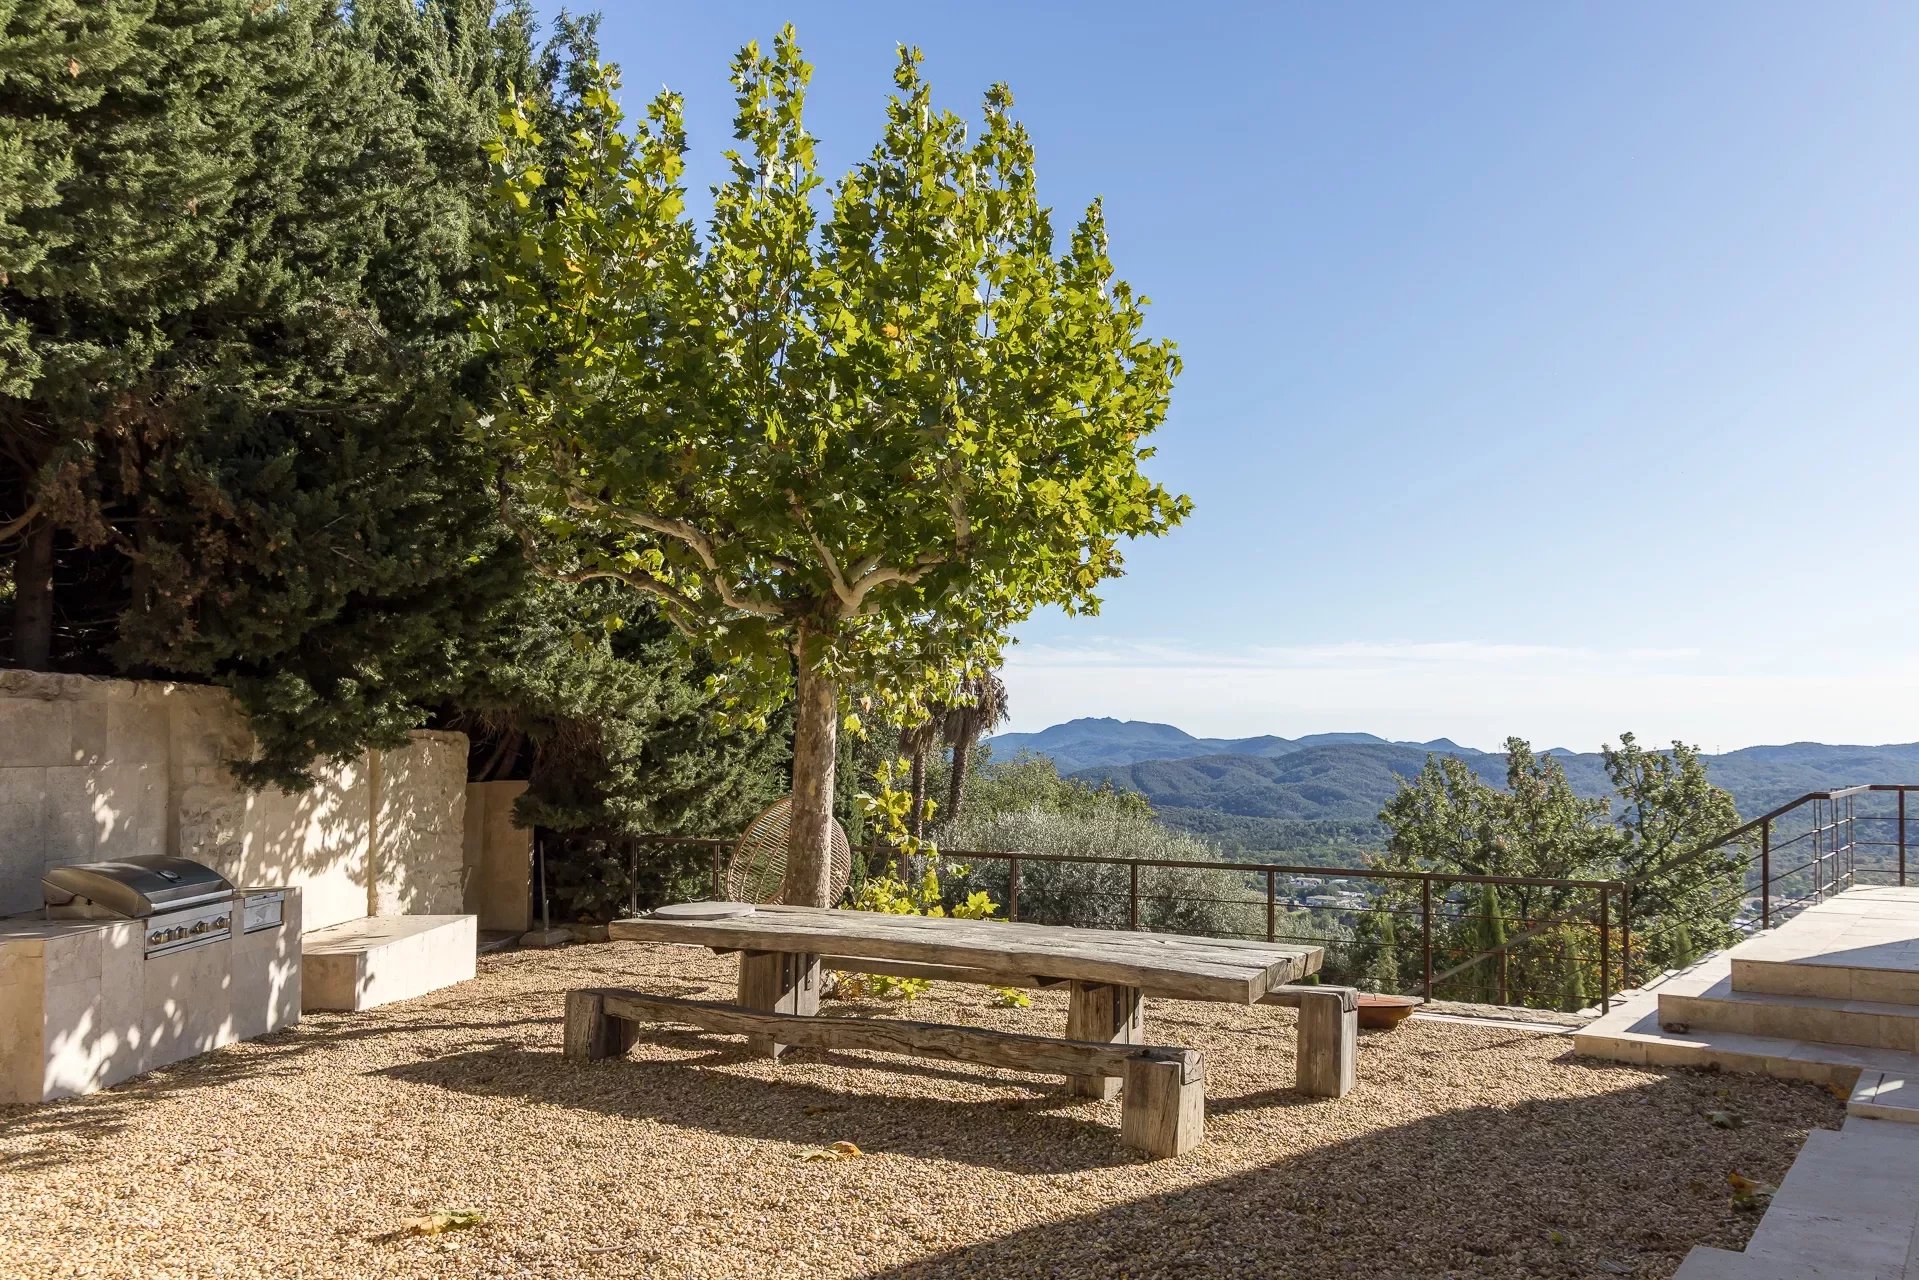 Bastide combines the charm of the old with modernity